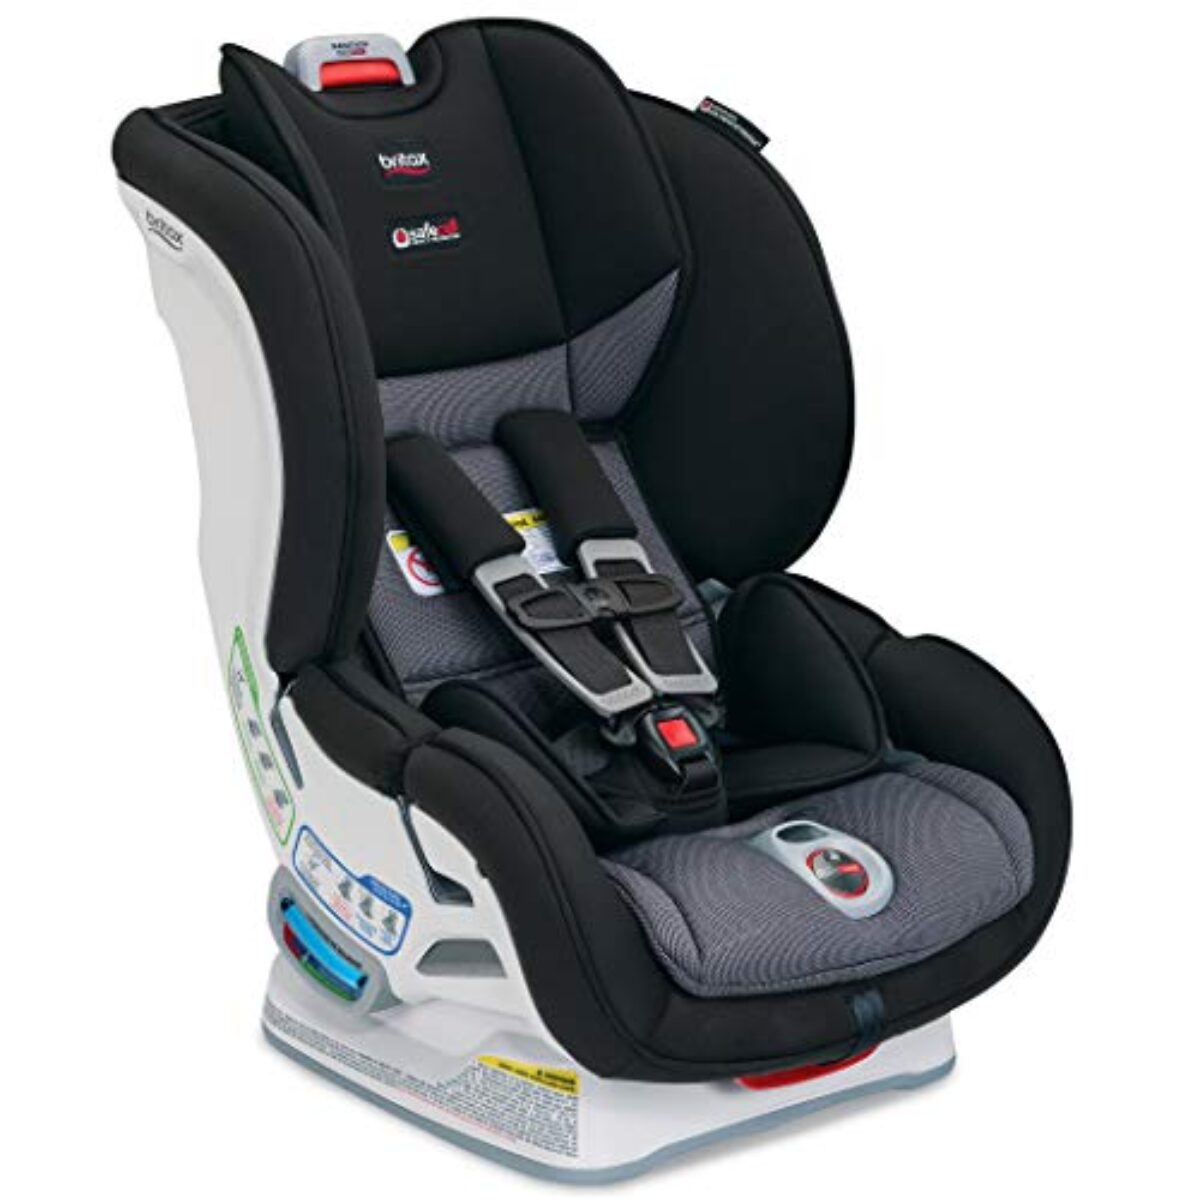 Booster Car Seats, Best And Safest Convertible Car Seat